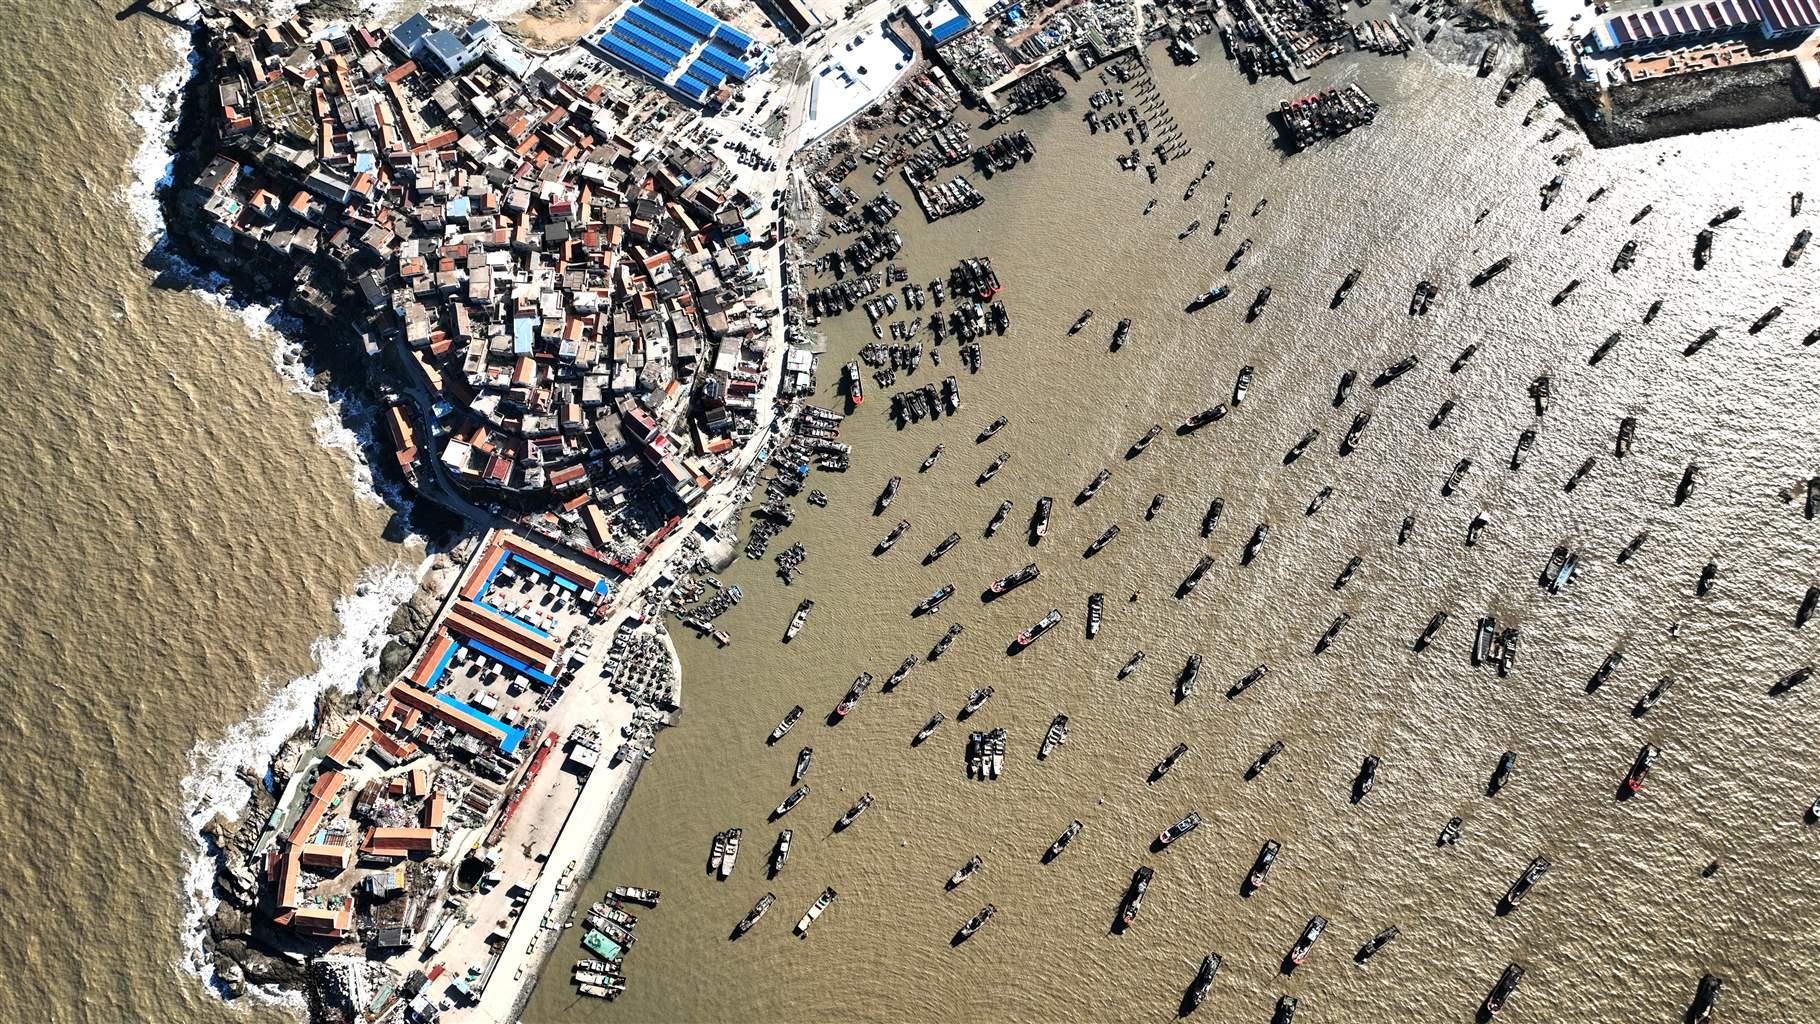 An aerial shot of dozens of fishing boats in brown waters at a harbor in China’s Jiangsu Province. Many buildings are clustered together on a sandy outcropping that houses the port.